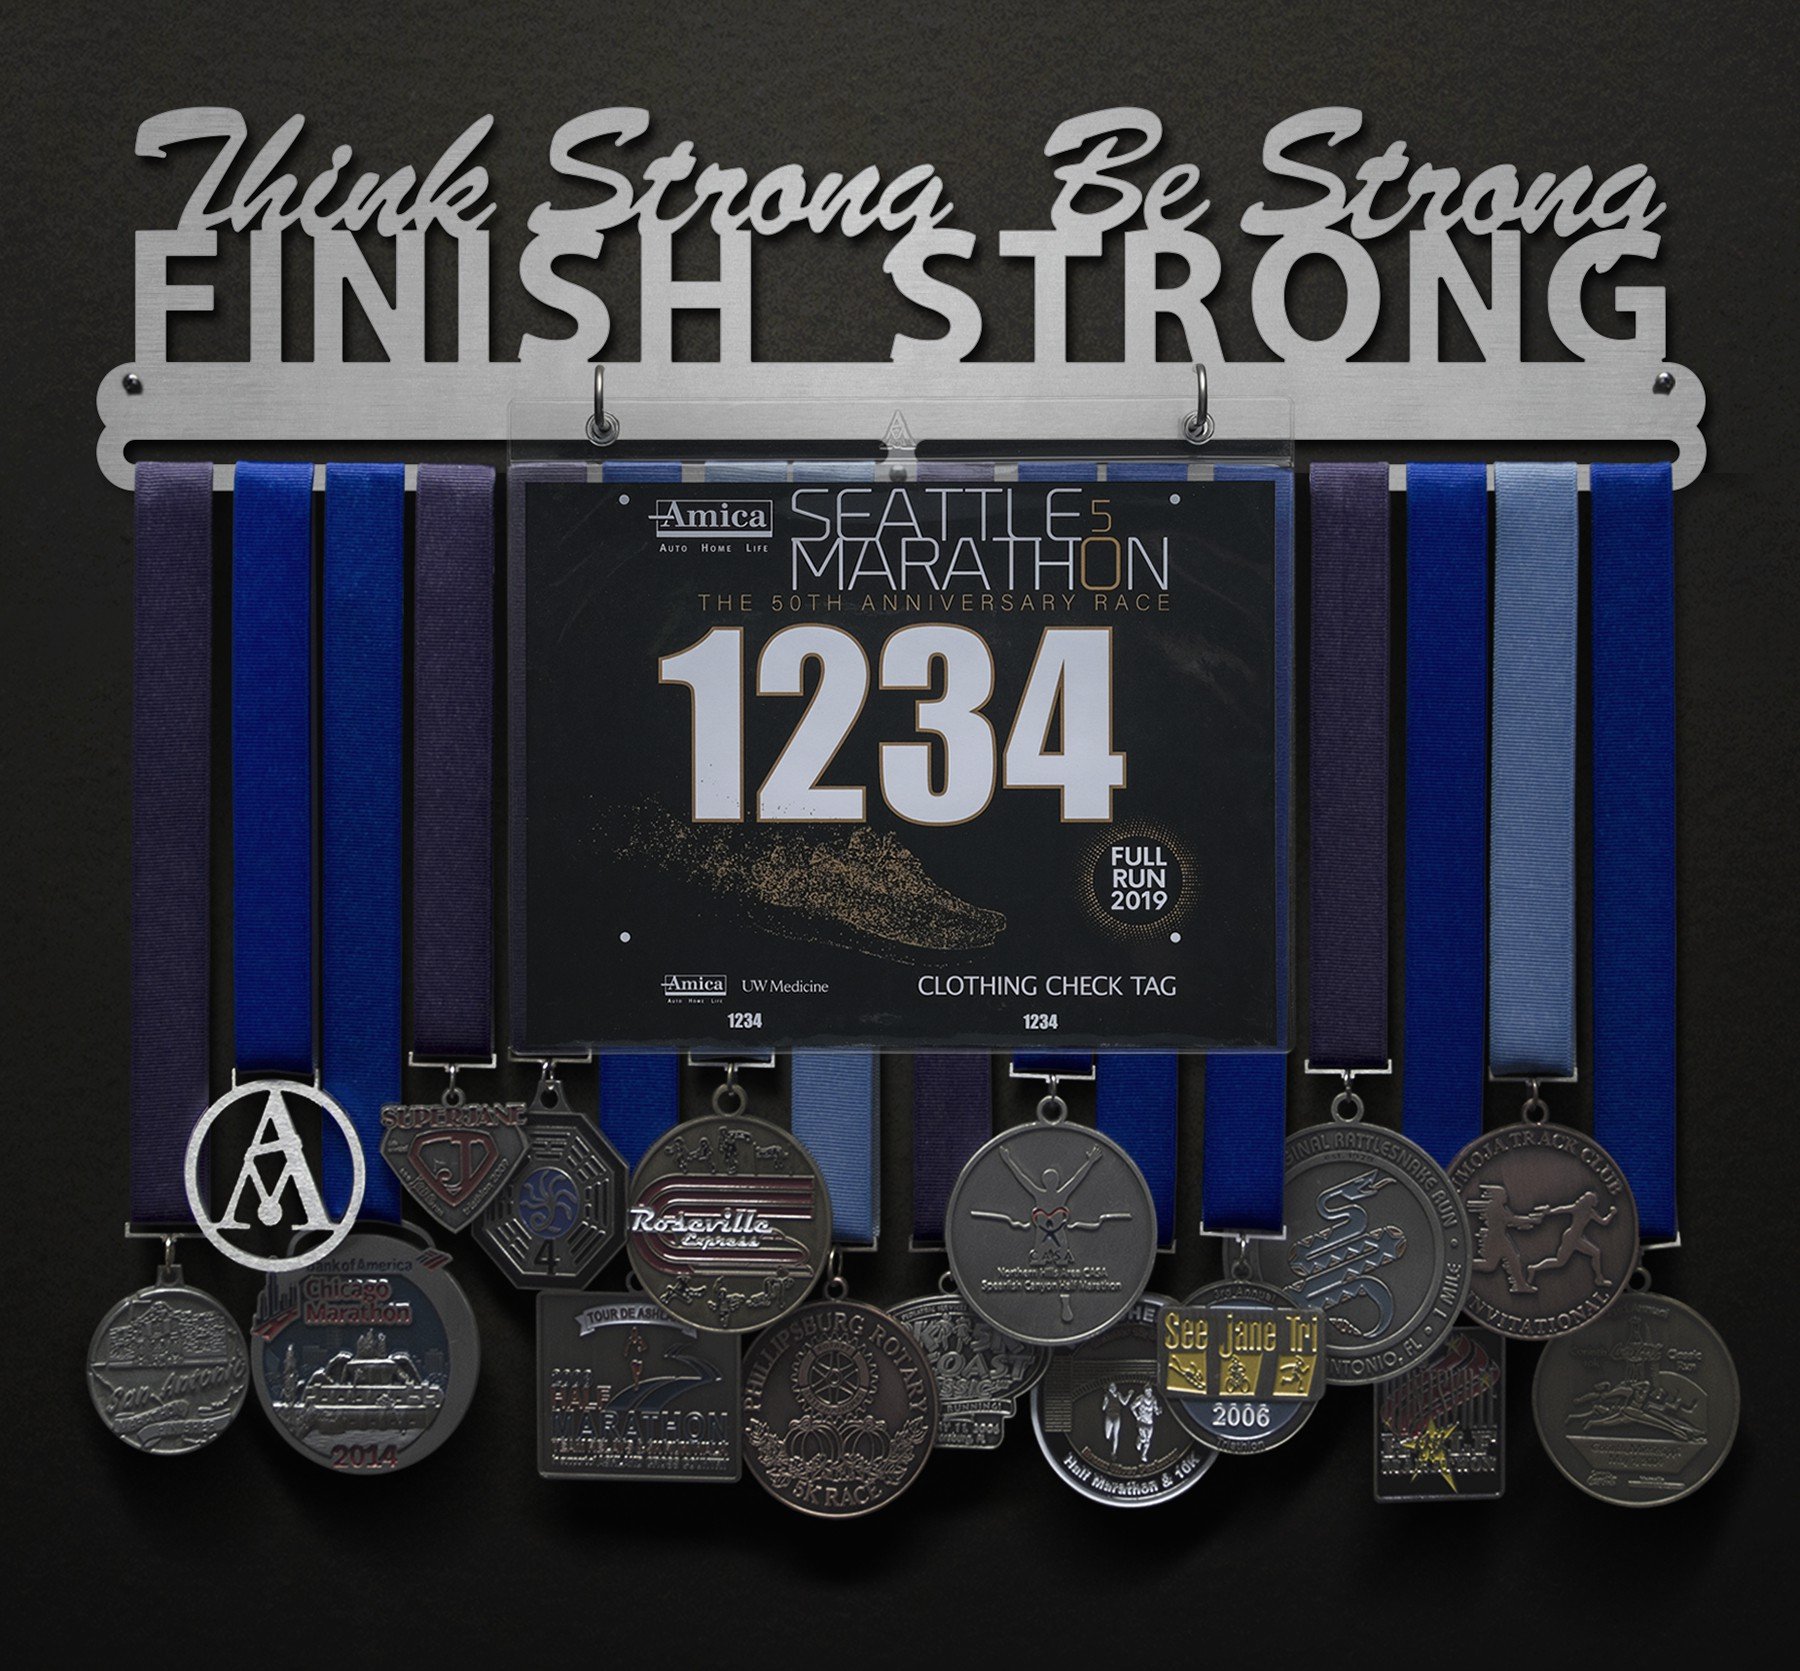 Think Strong, Be Strong, Finish Strong Bib and Medal Display